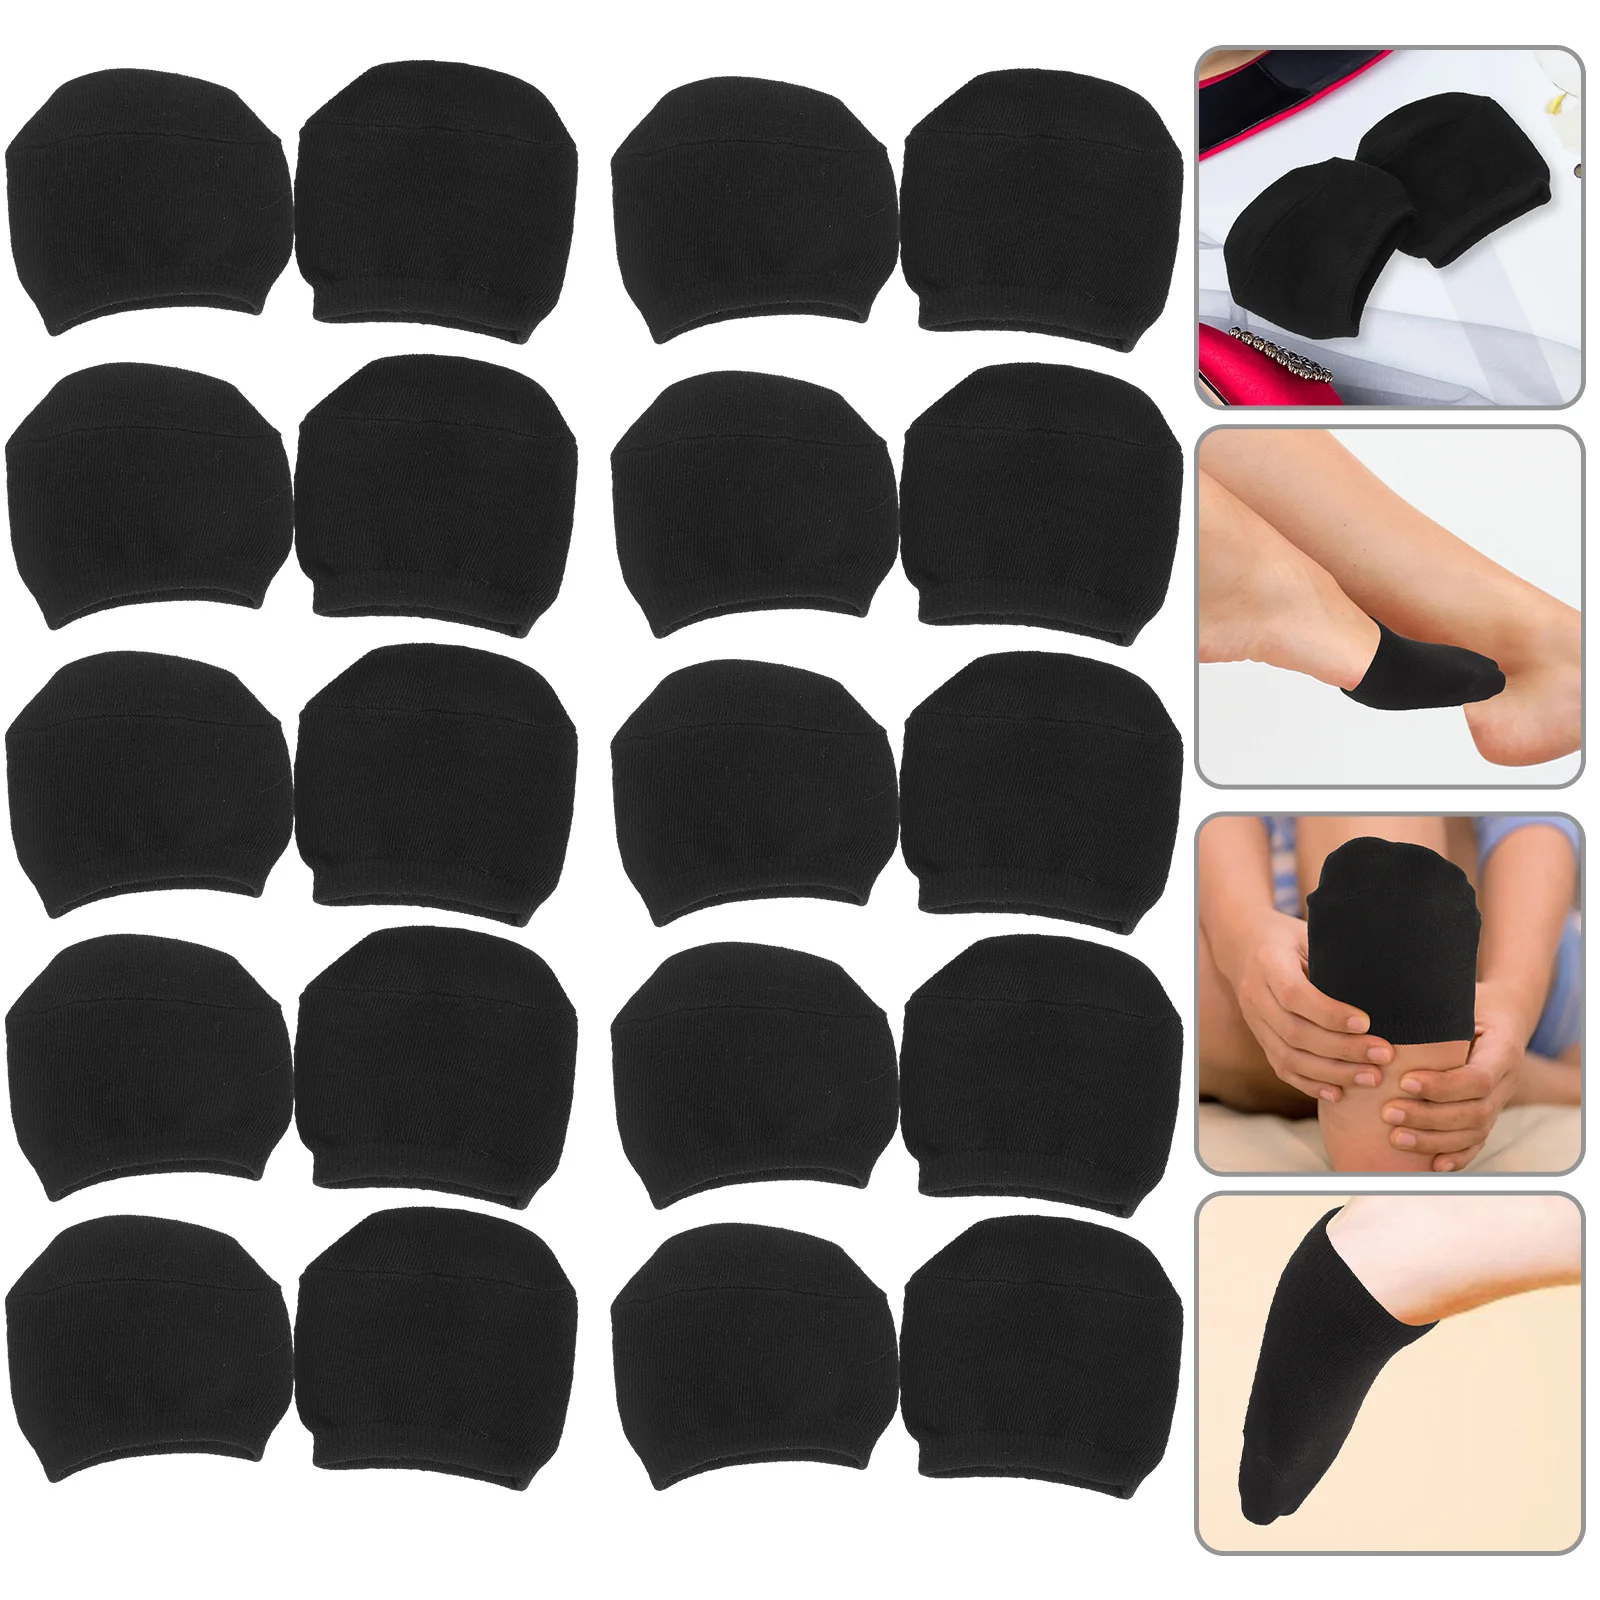 

10 Pairs of Forefoot Socks Breathable Half Palm Socks Sweat Absorbing Half Palm Socks Invisible Socks